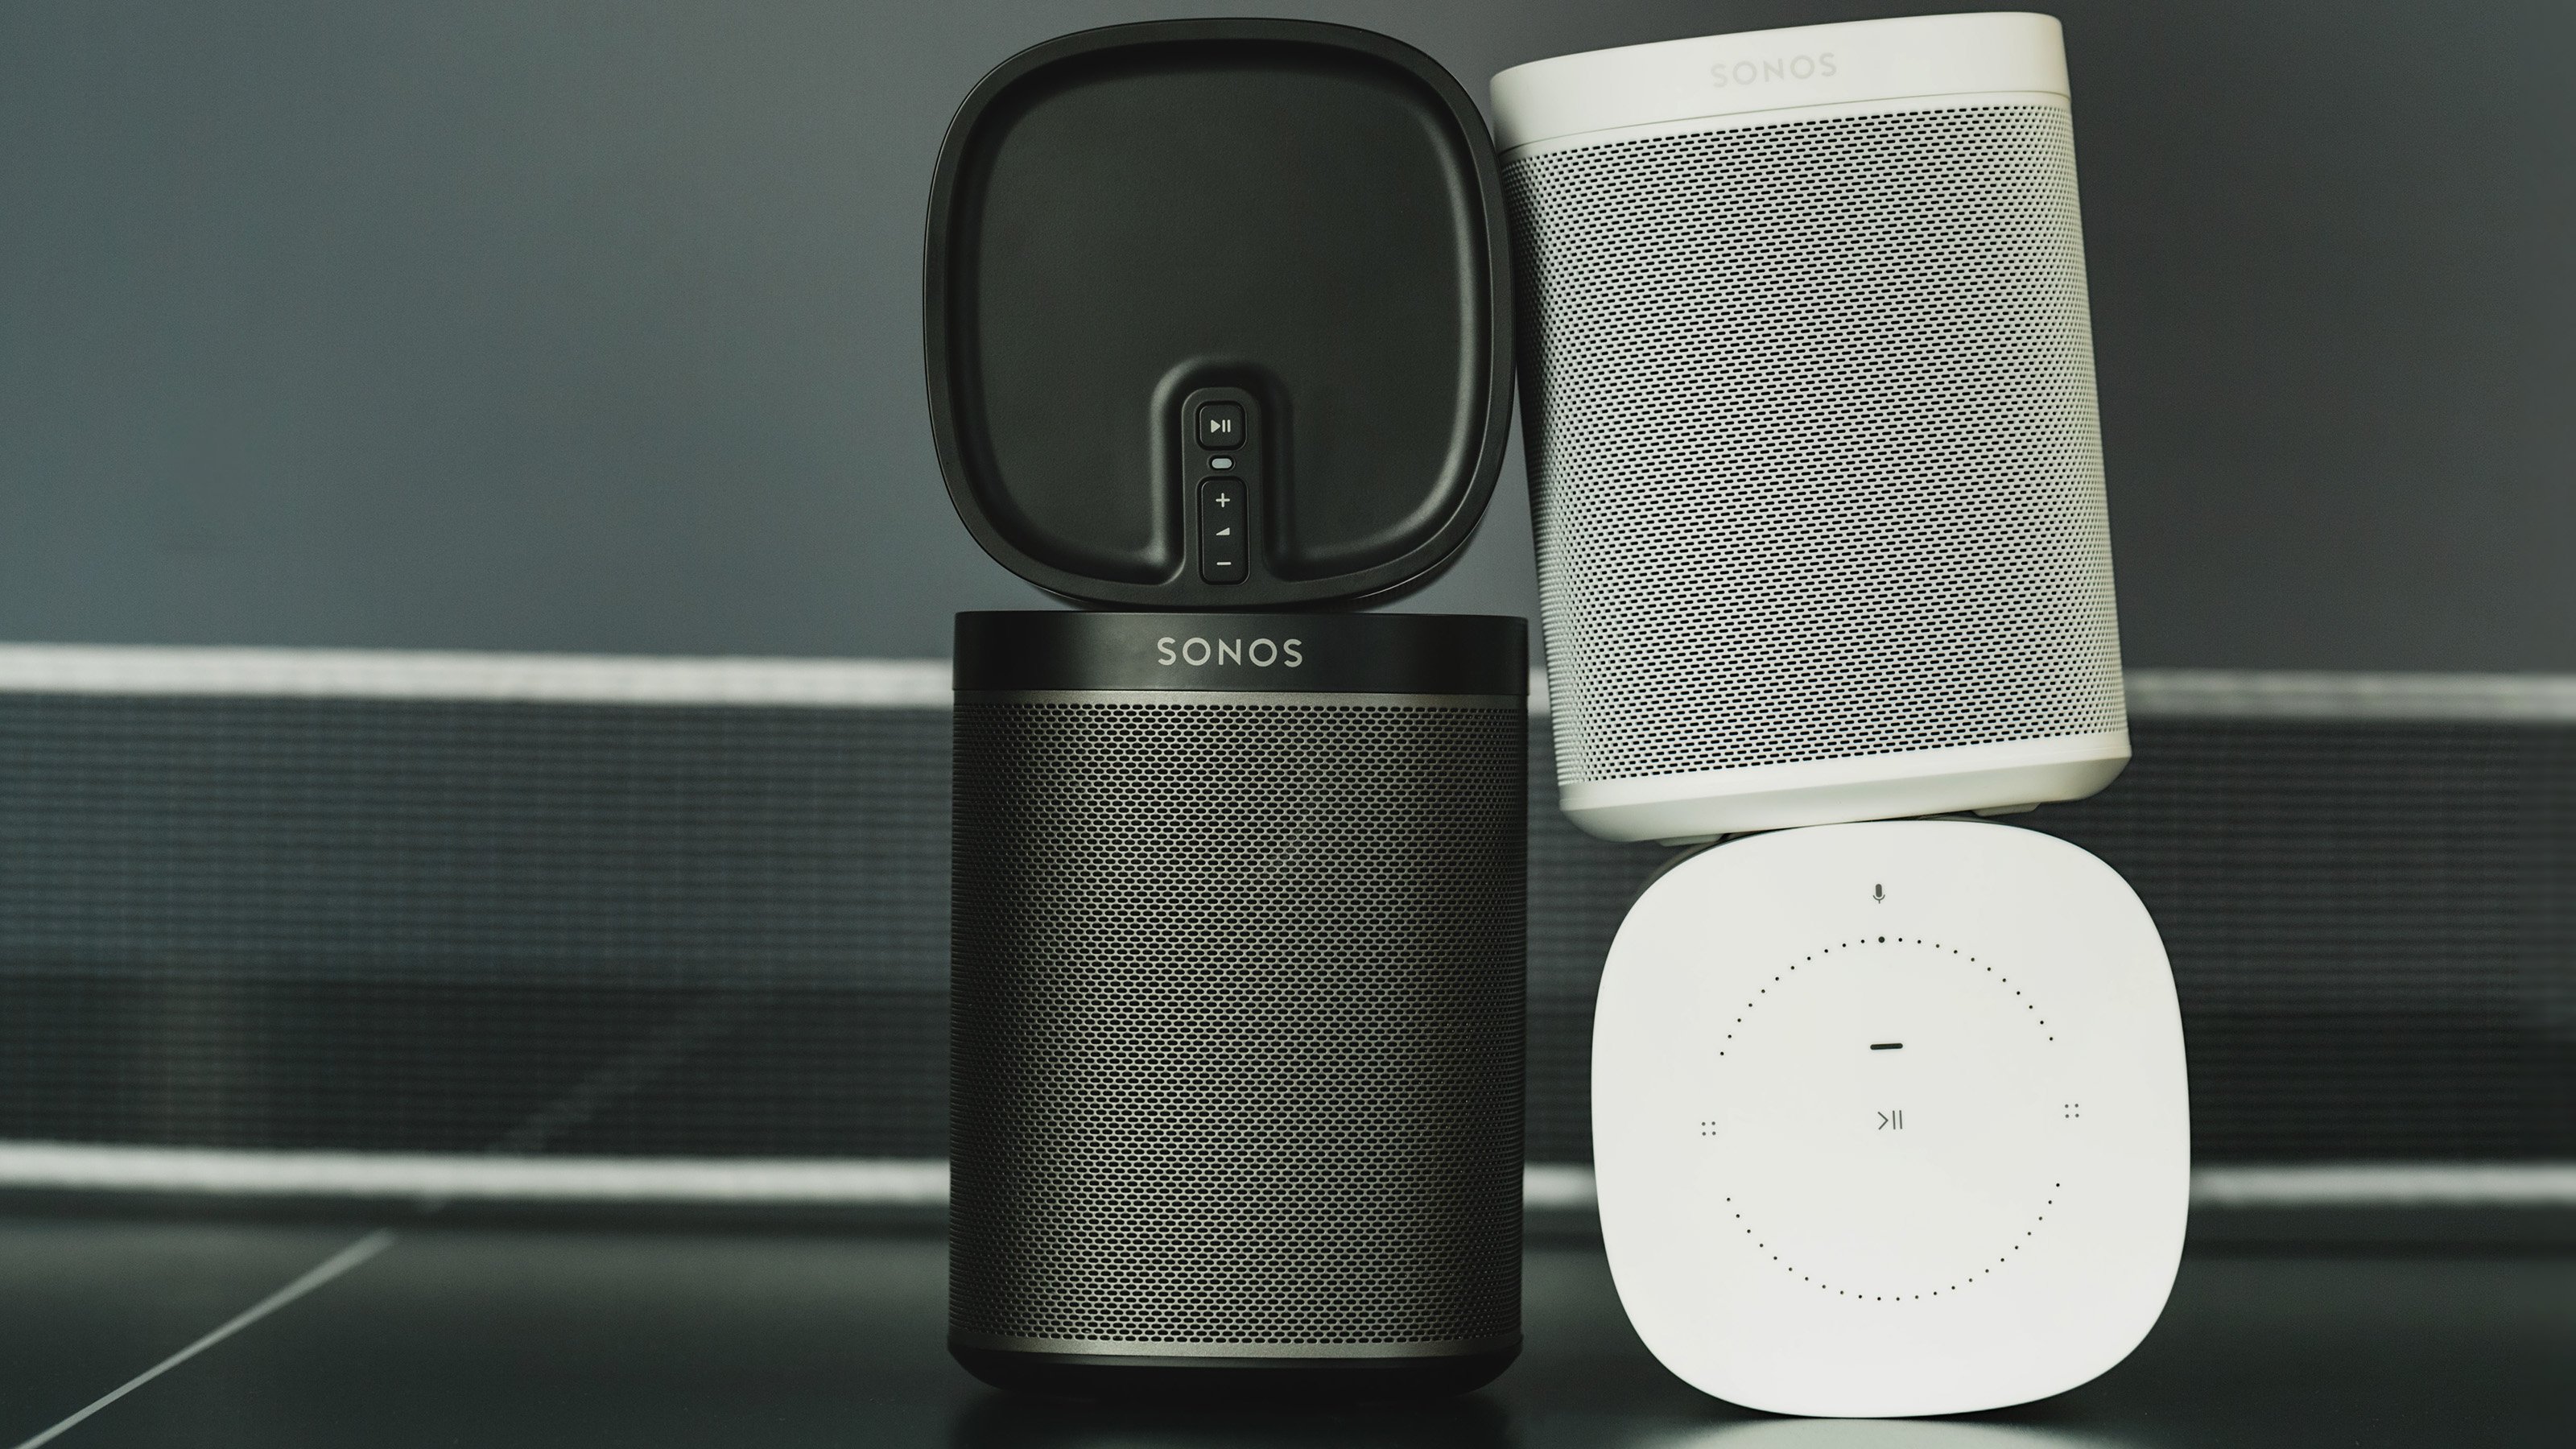 How to set up Assistant on Sonos nextpit